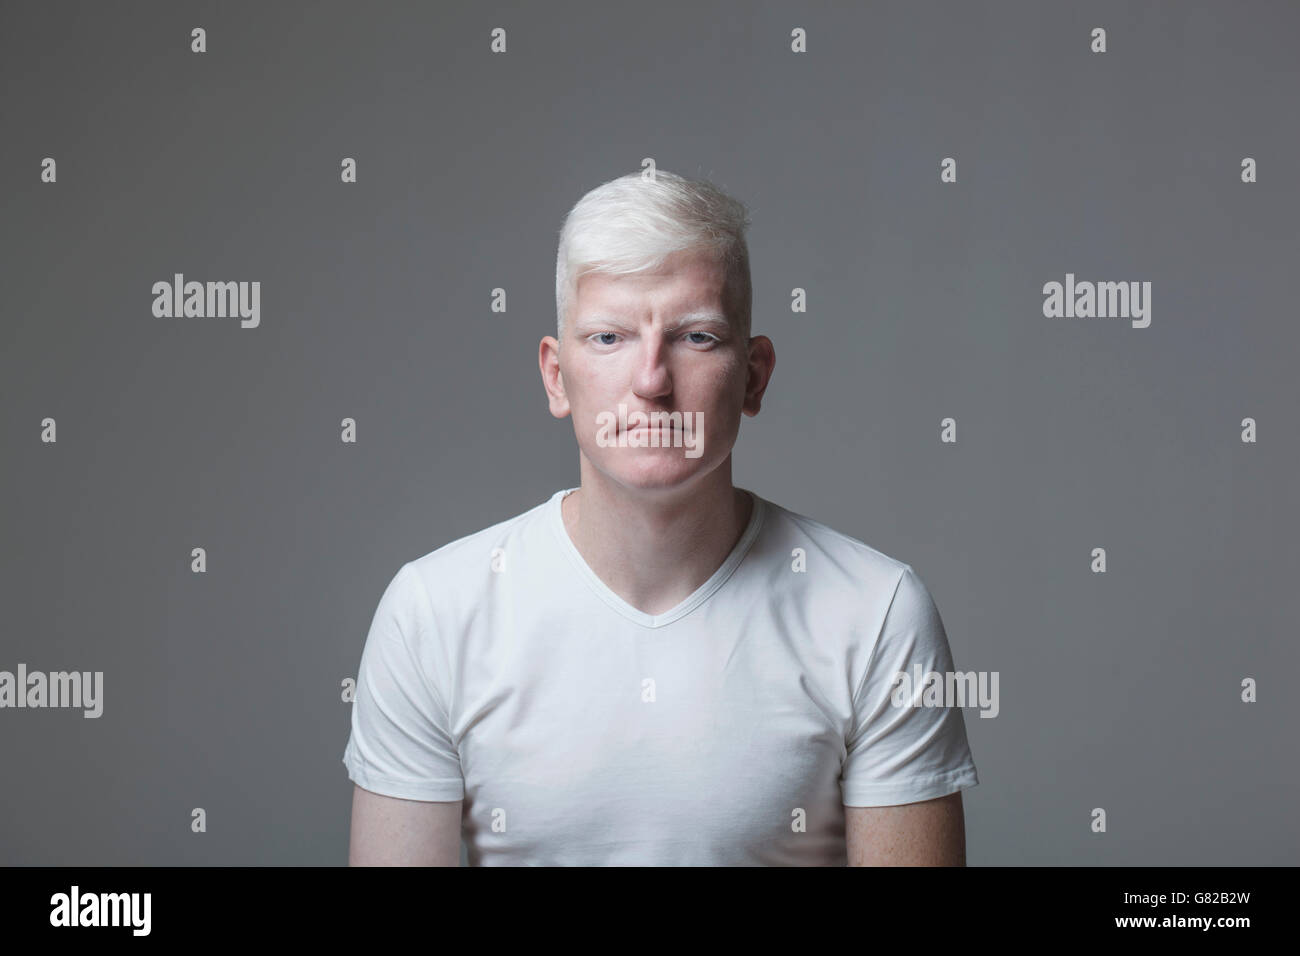 Portrait of young albino man against gray background Stock Photo